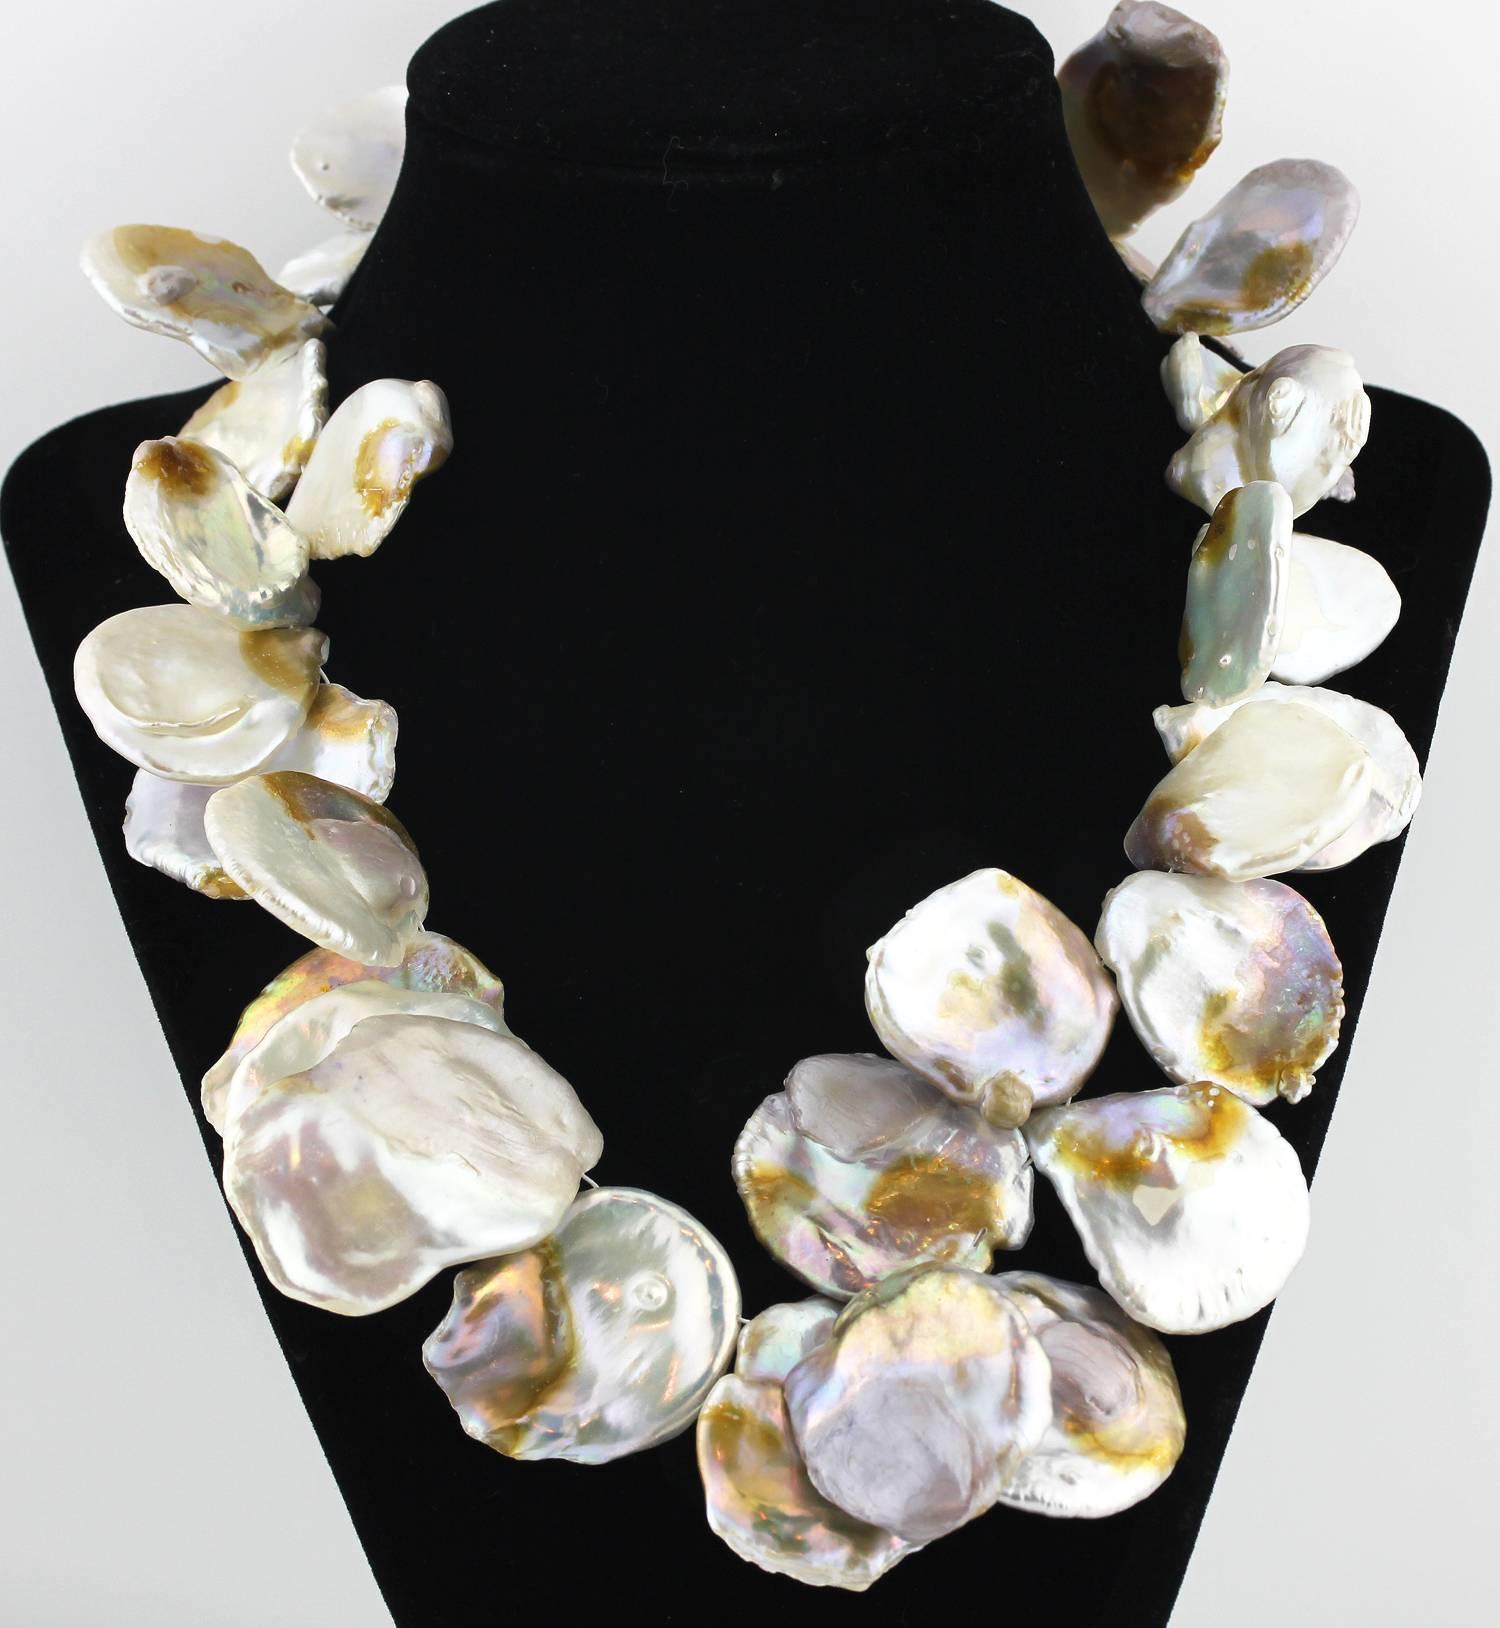 Gemjunky Dramatically big unique pearlessent goldy flecked and silvery playful white Keshi Pearls that you can arrange in different designs by flipping them one direction or another on this handmade pearl necklace.  The nacre is natural.
Size: 